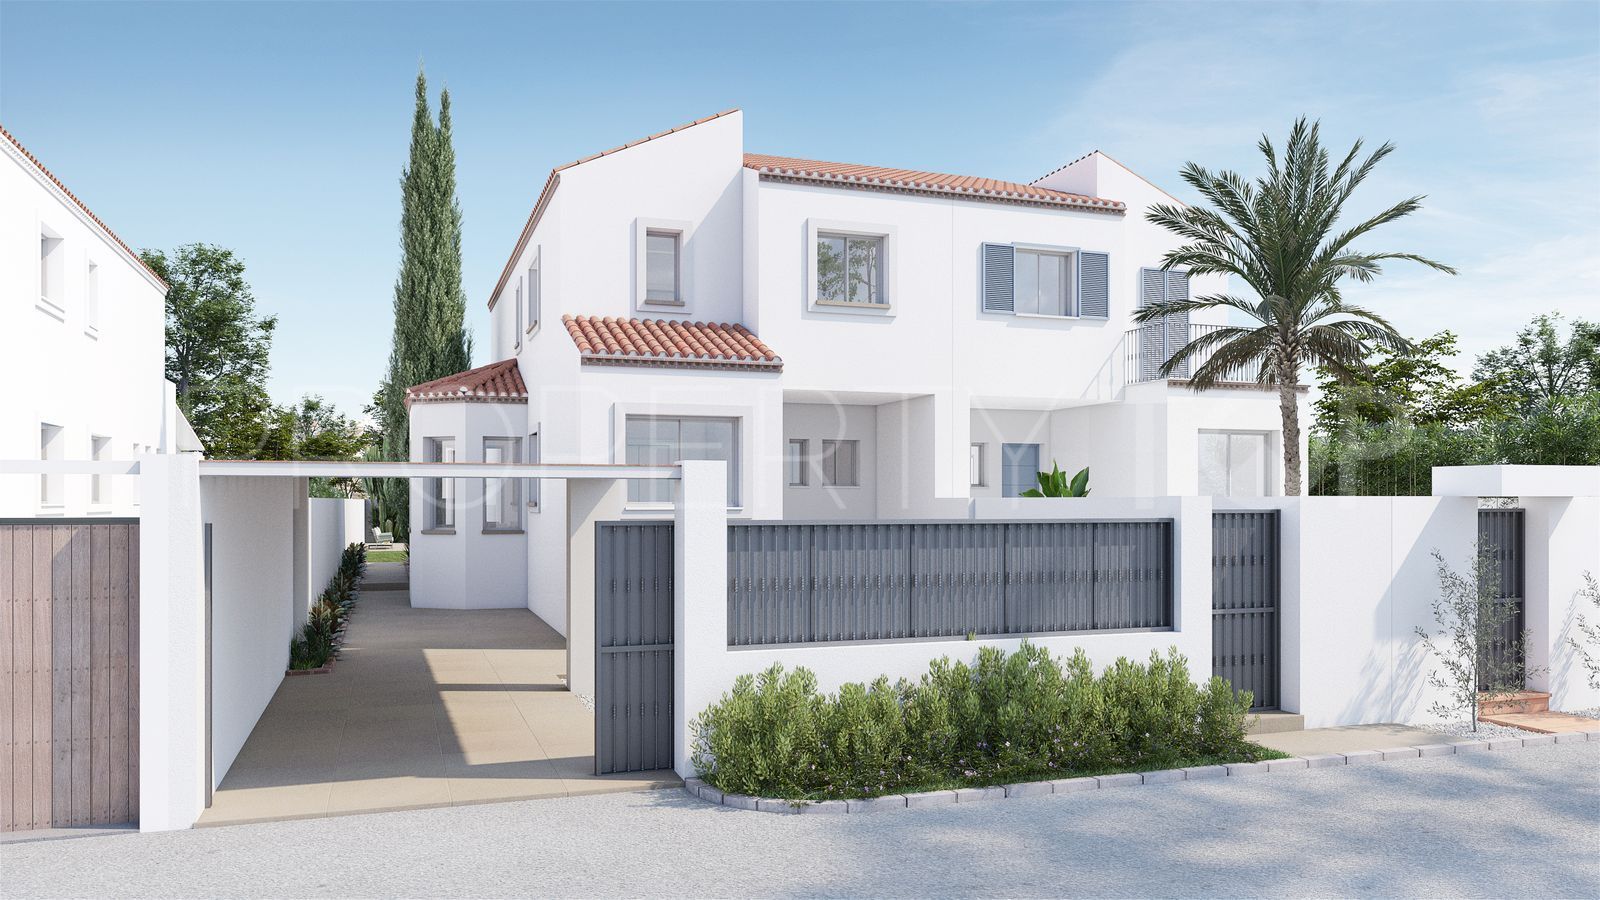 For sale Guadalmina Baja semi detached house with 4 bedrooms